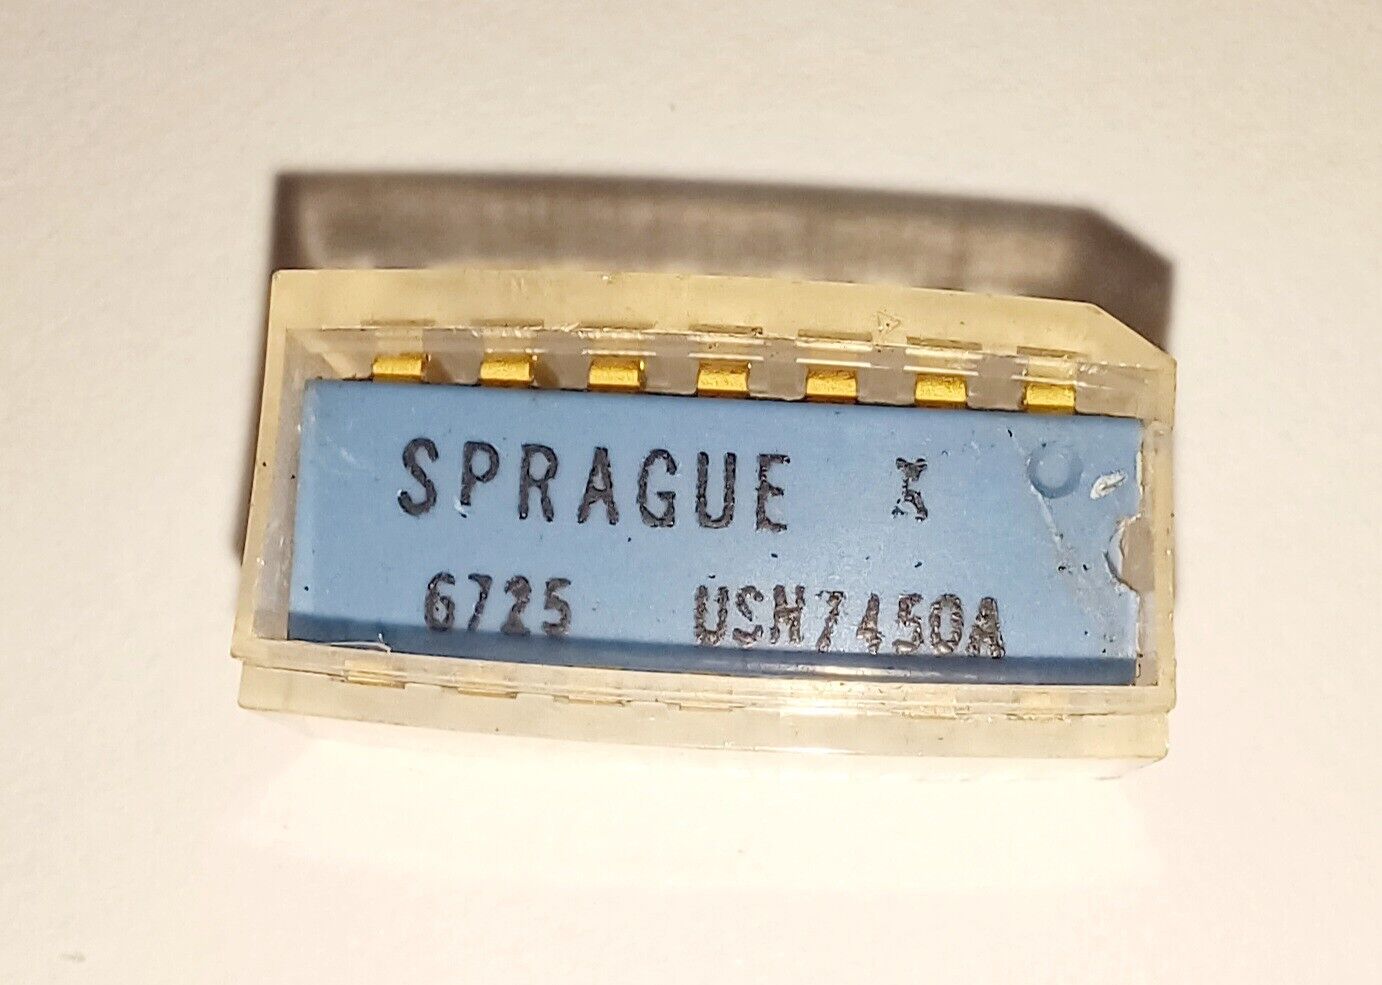 Sprague USN7450A IC chip microchip DIP-14 vintage from 1967   Gold plated legs